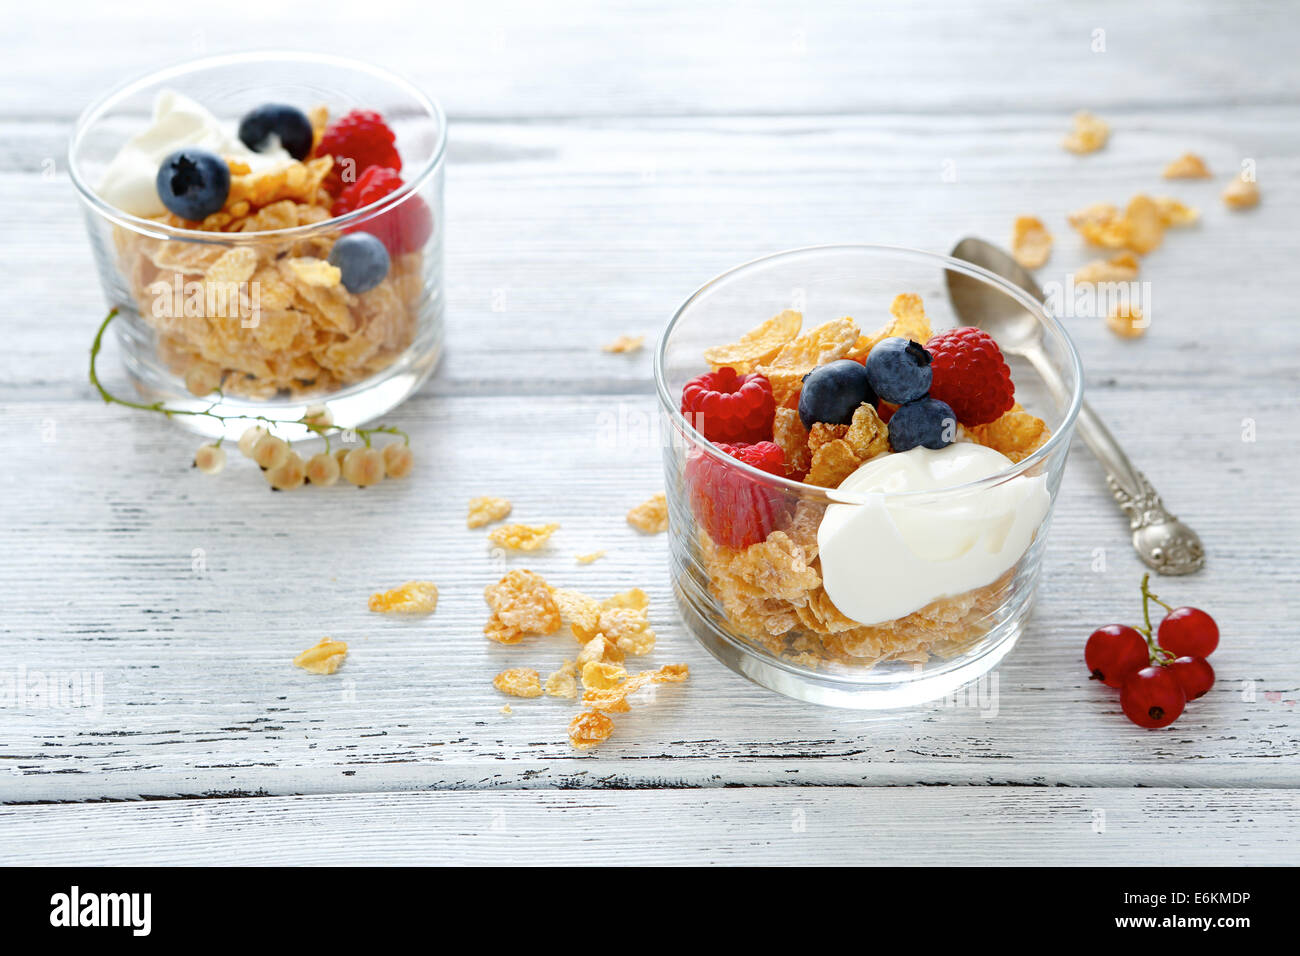 two glasses of cereal and yogurt, food closeup Stock Photo